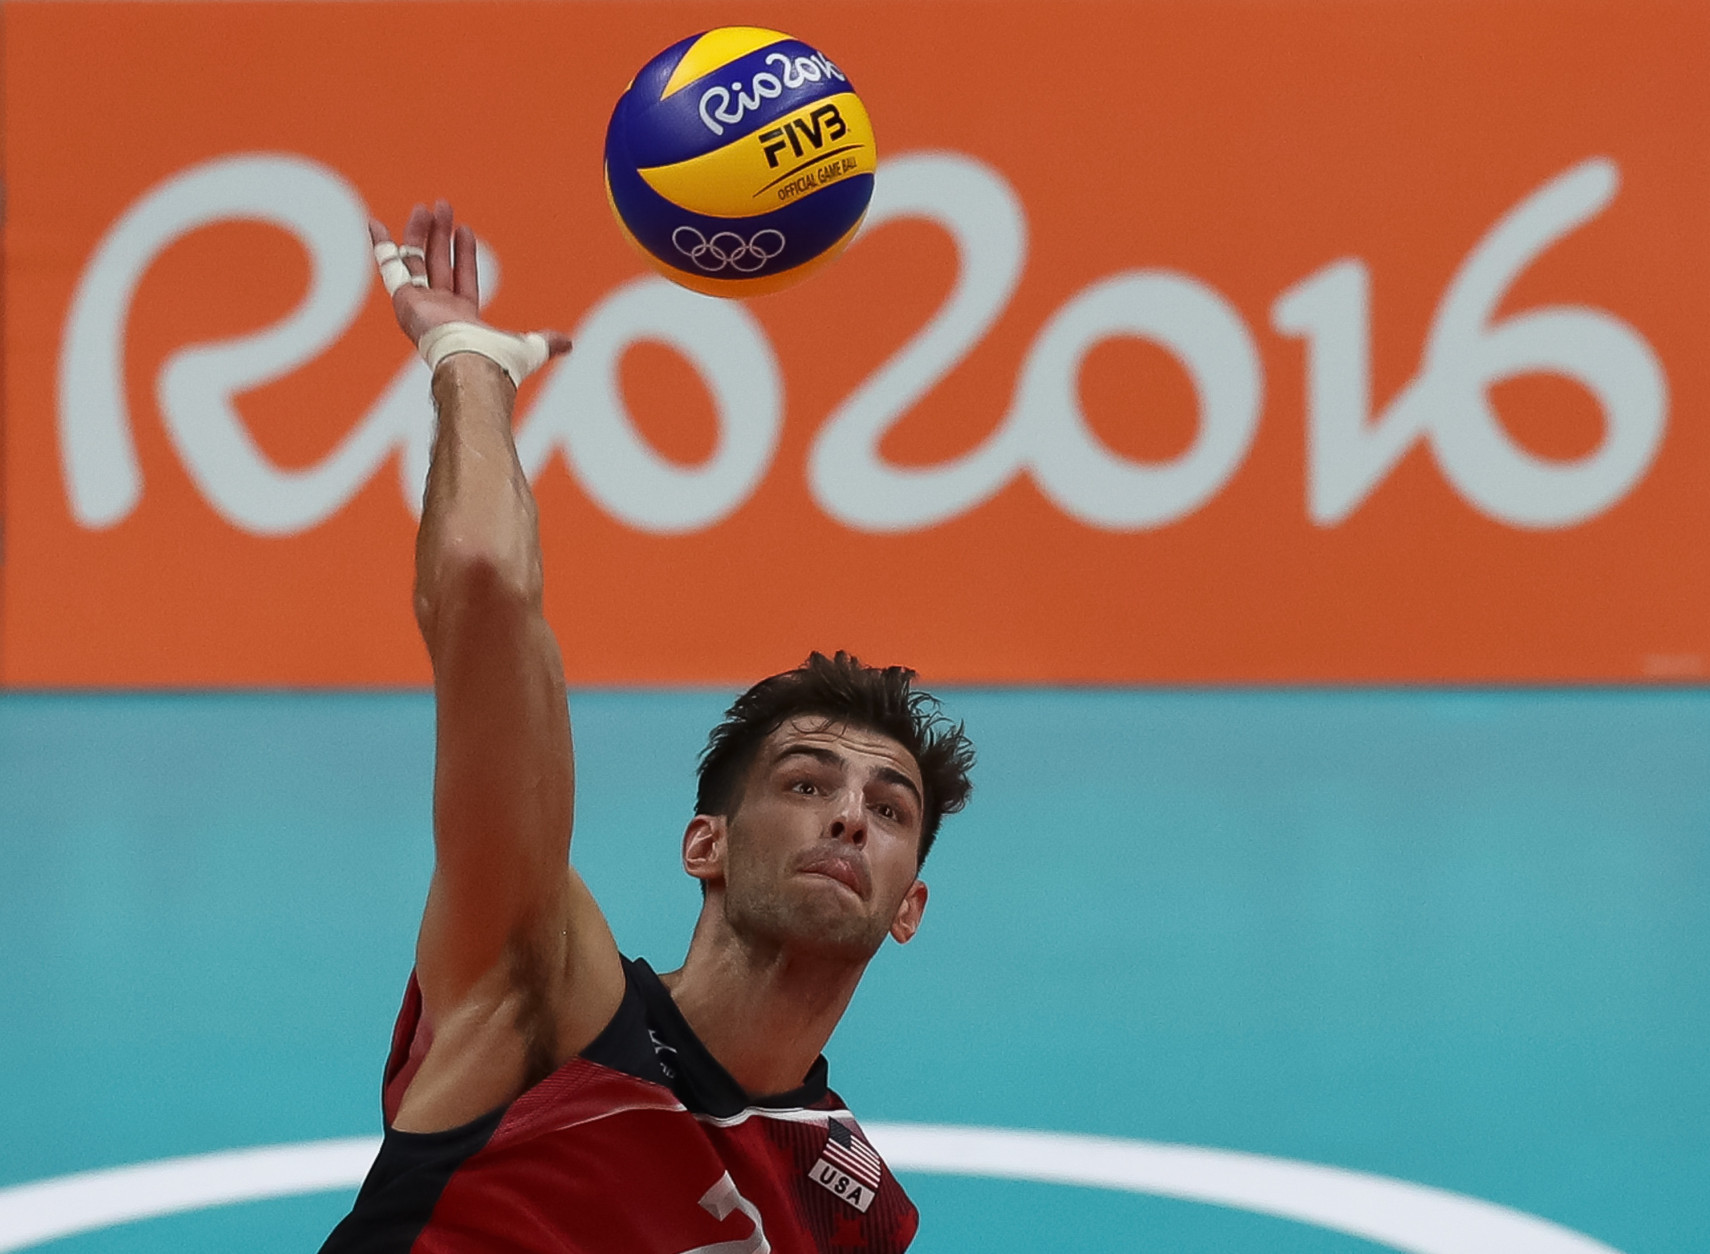 RIO DE JANEIRO, BRAZIL - AUGUST 09:  Aaron Russell of the United States spikes the ball during the men's qualifying volleyball match between the United States and Italy on Day 4 of the Rio 2016 Olympic Games at the Maracanazinho on August 9, 2016 in Rio de Janeiro, Brazil.  (Photo by Buda Mendes/Getty Images)